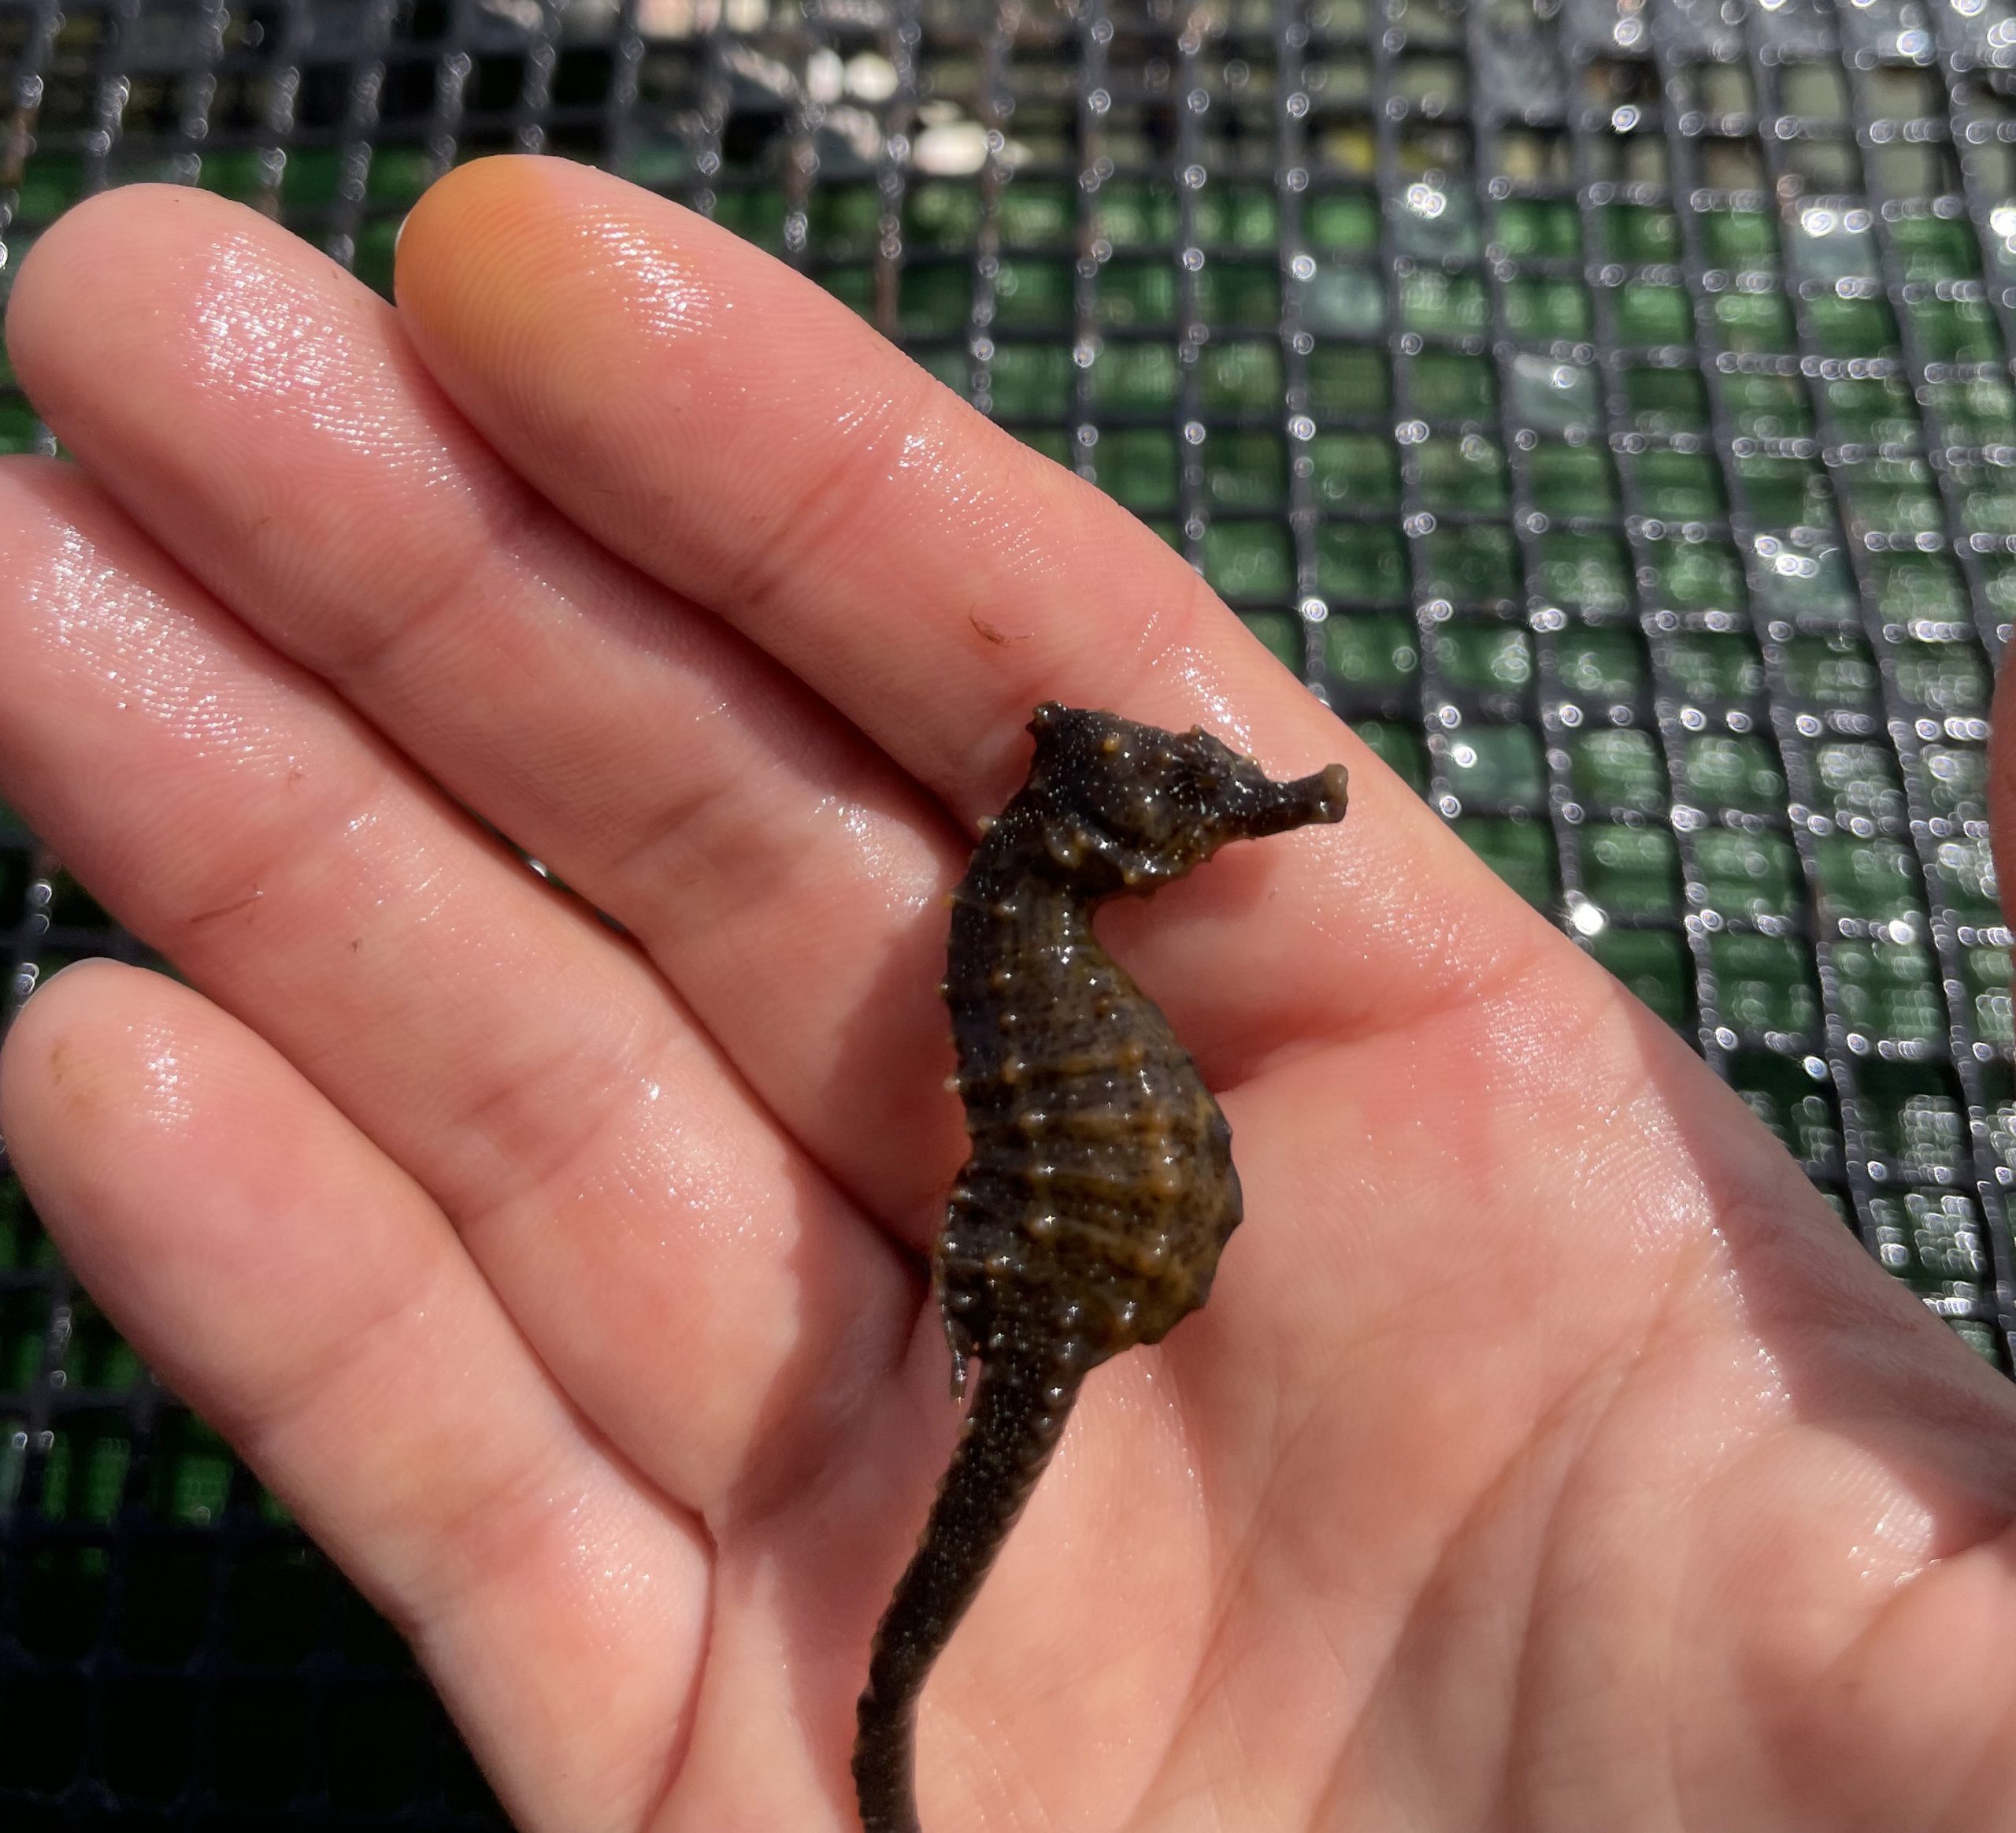 A small seahorse in the palm of a hand